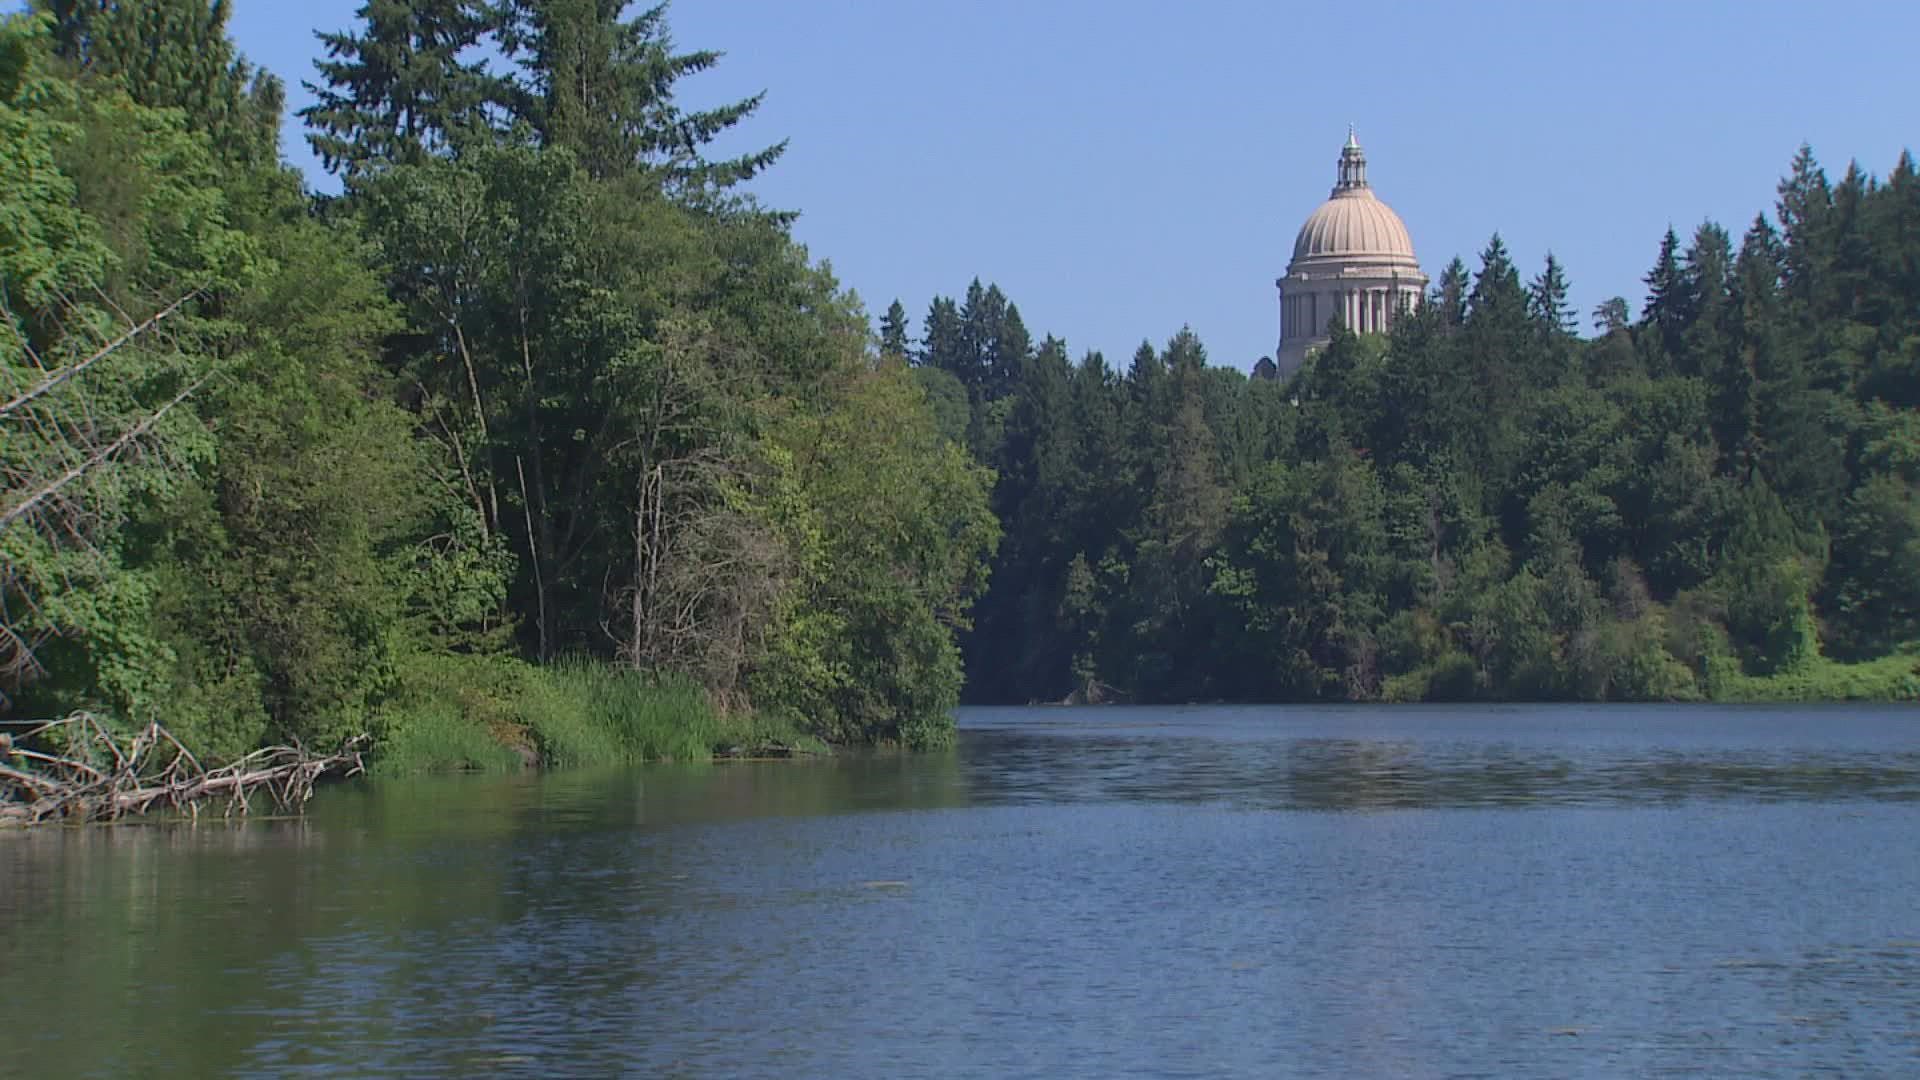 Experts say allowing for natural tidal flows in the area where the Deschutes River meets Puget Sound will result in less sediment collection and cleaner water.